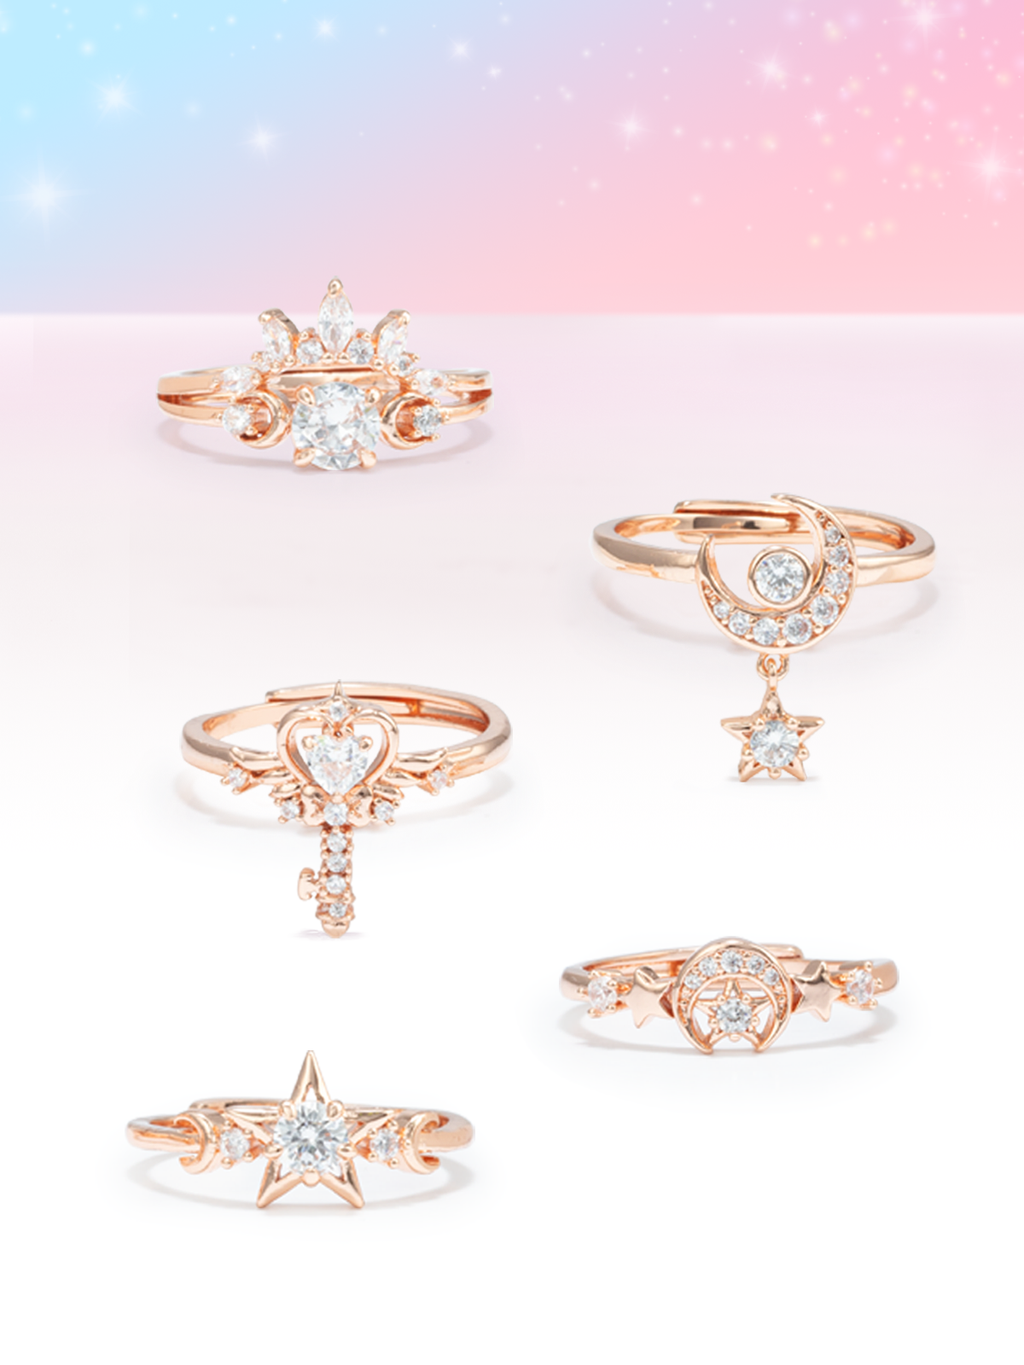 Magical Girl Candle - Magical Girl Ring Collection (Sailor Moon Inspired)